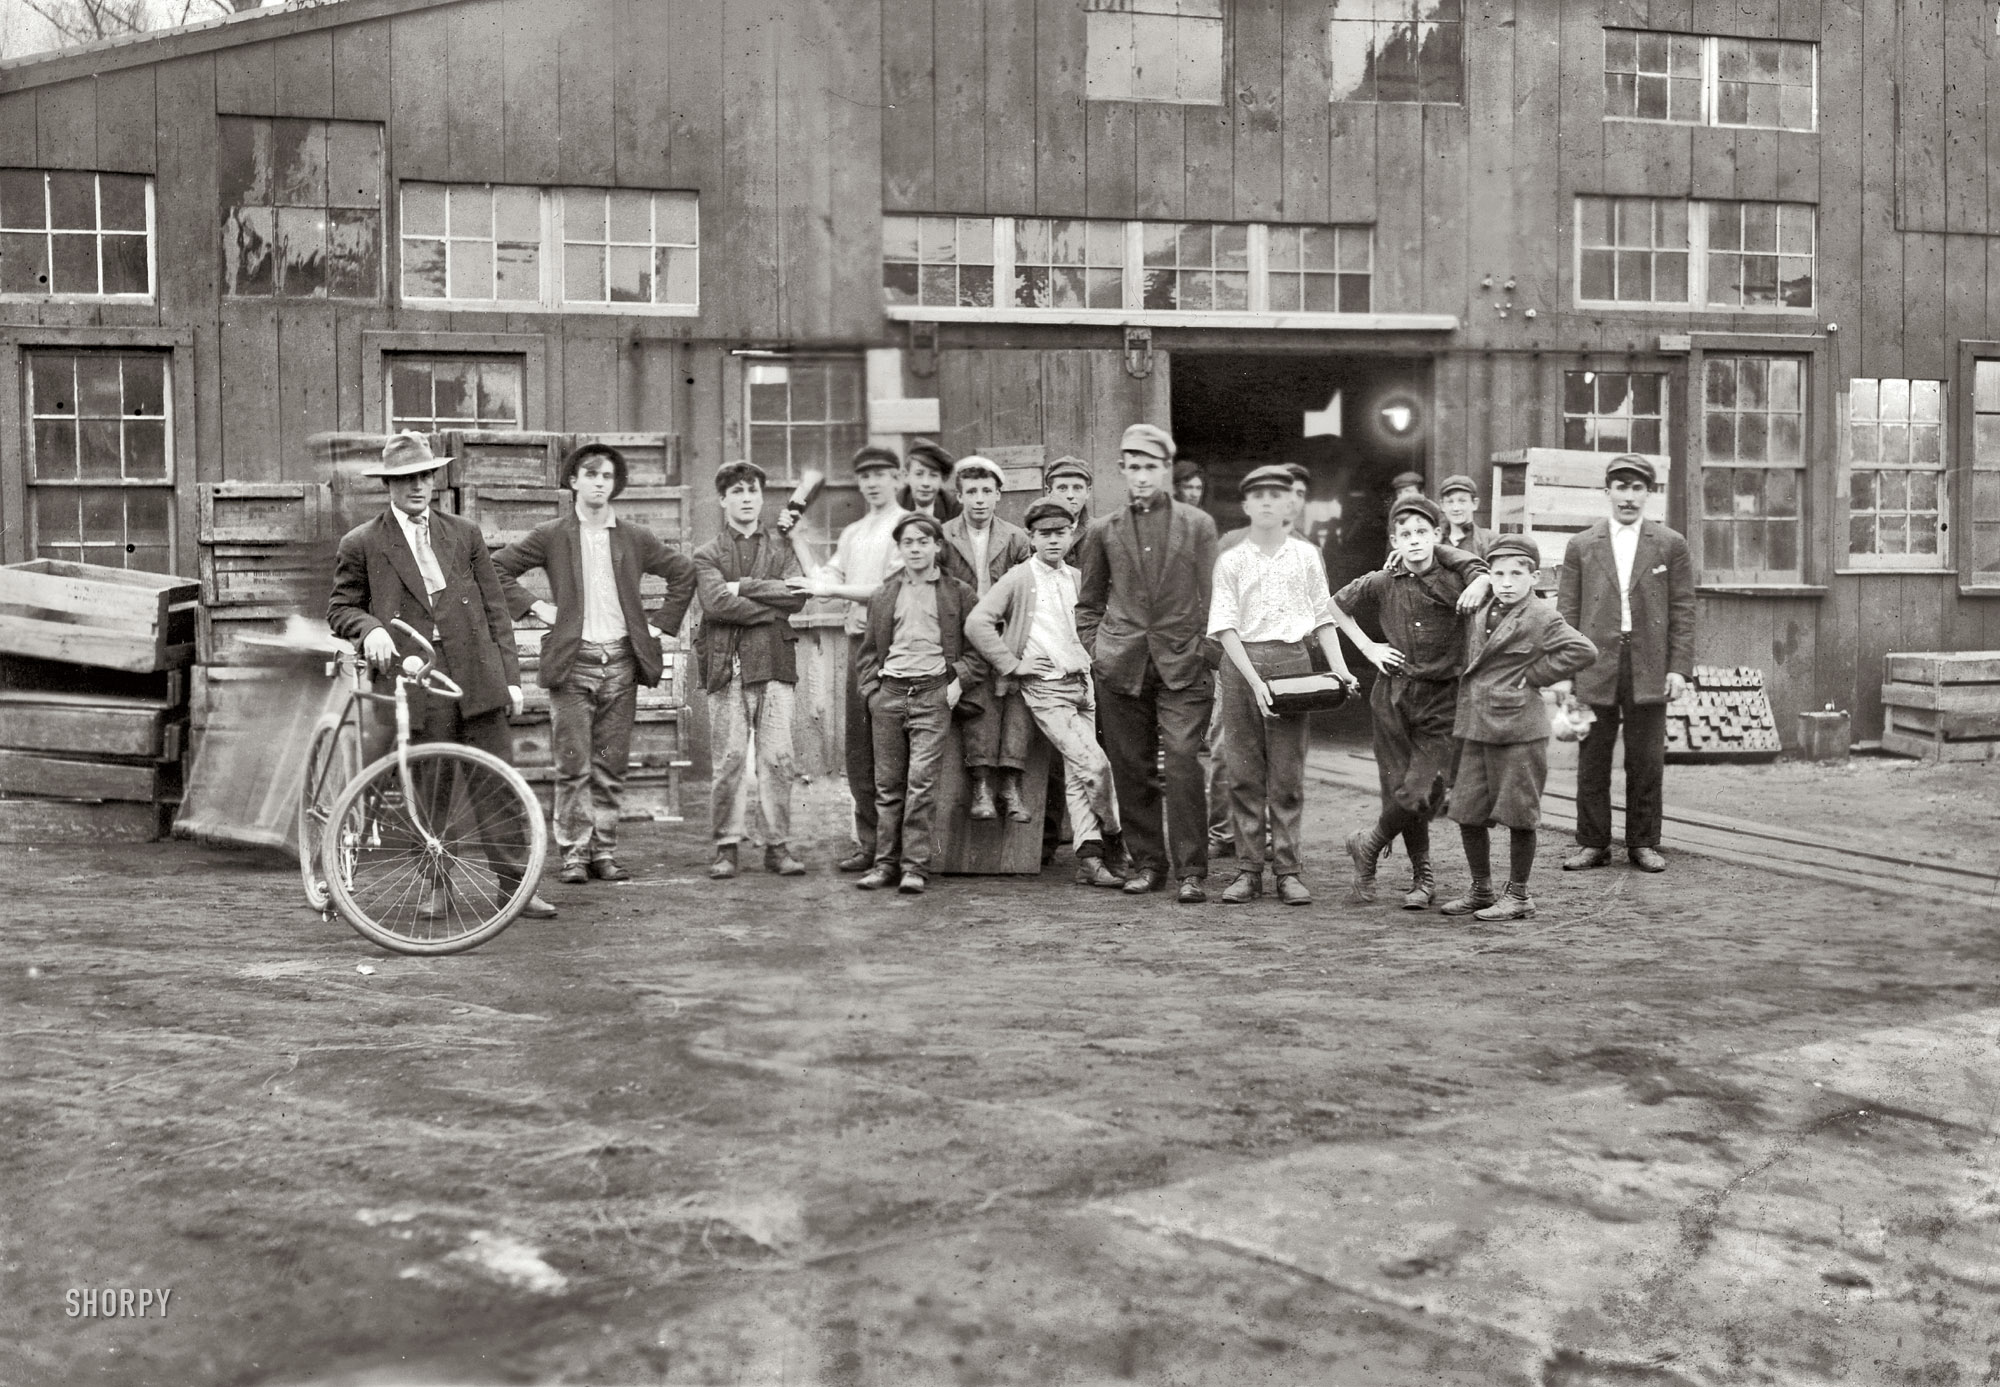 November 1909. "Some of night shift waiting to go to work. Cumberland Glass Works, Bridgeton, New Jersey. One boy is 13 years old." And then we have the operator on the left. Photograph by Lewis Wickes Hine. View full size.